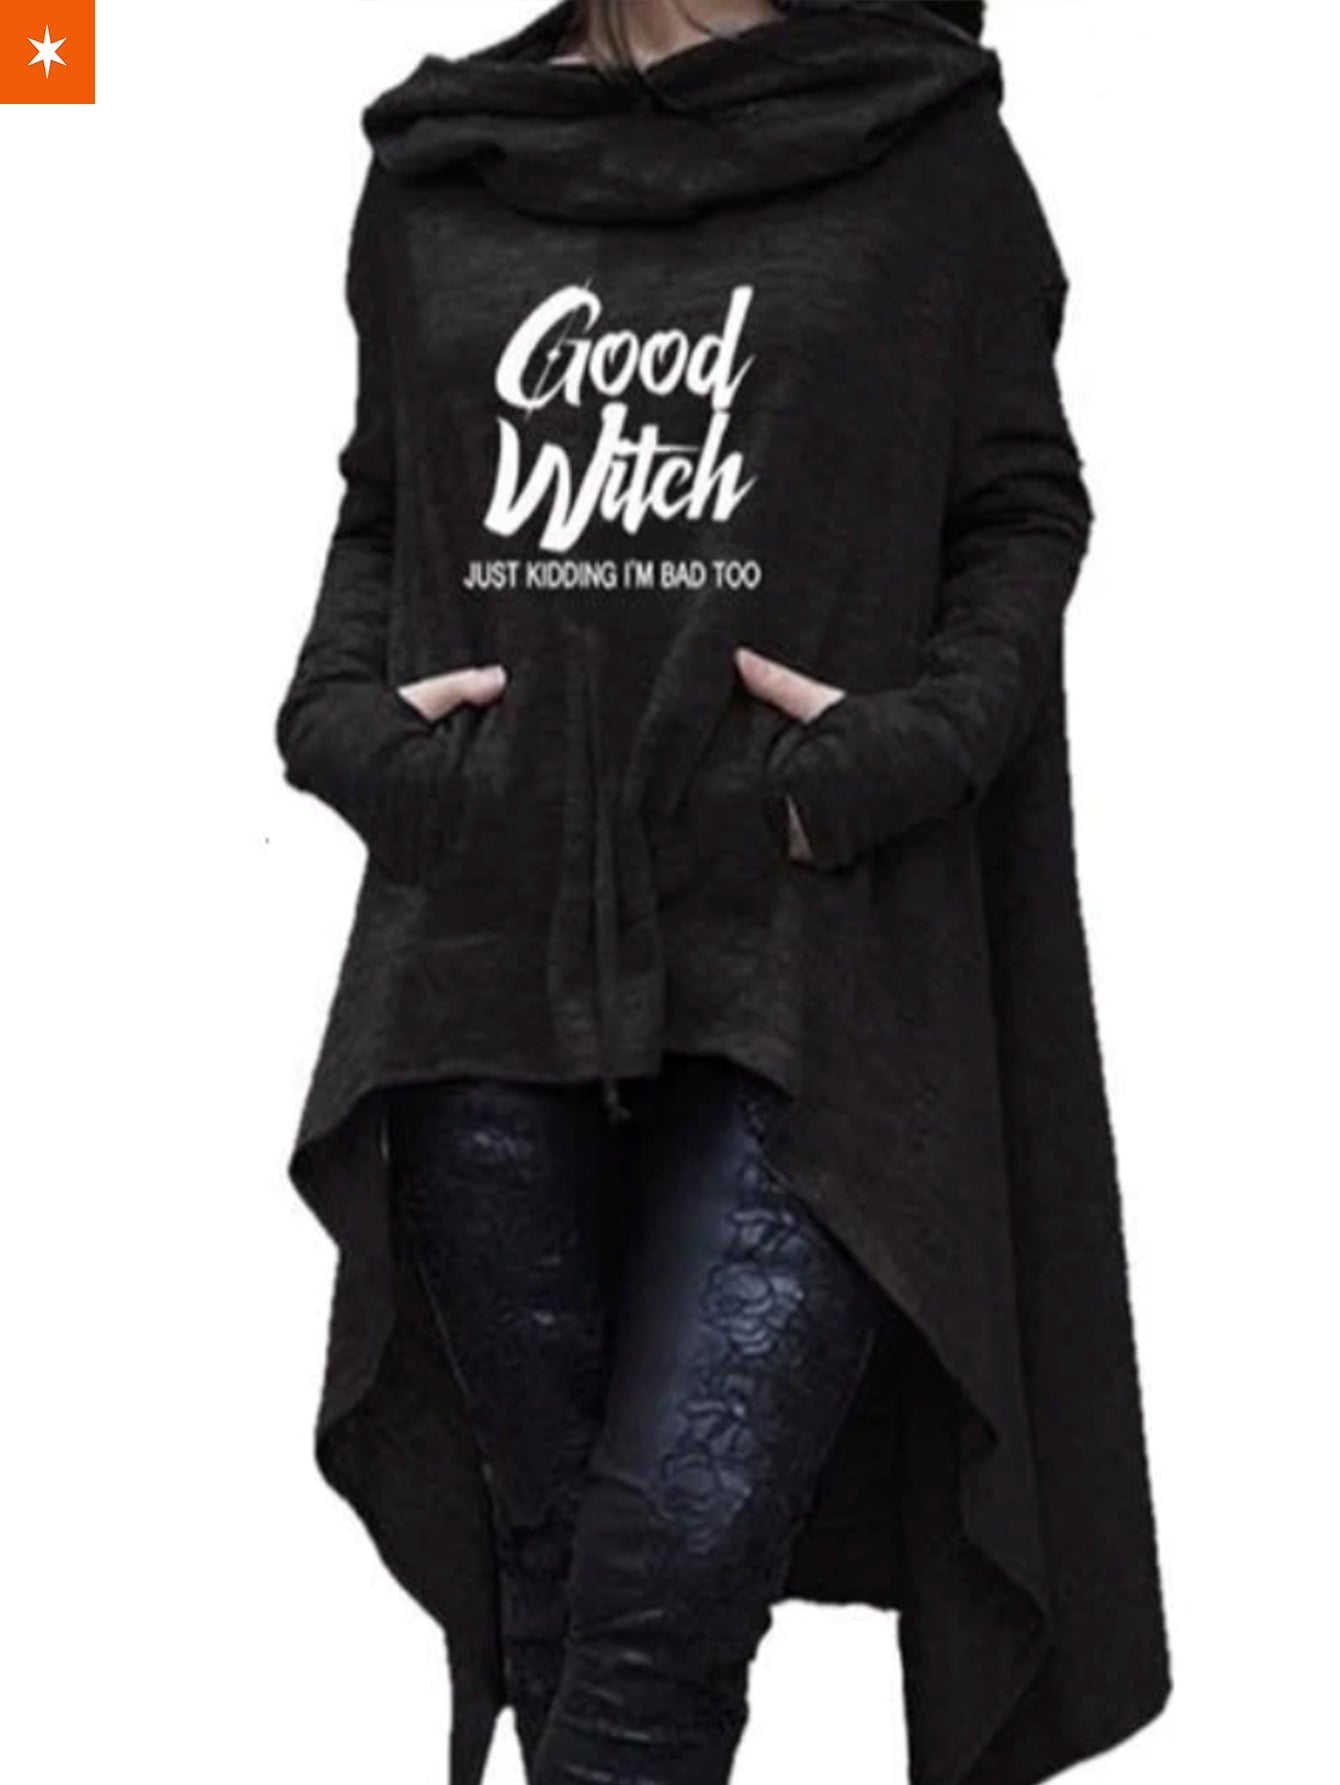 Fandomaniax - Good Witch and Bad Witch Hoodie